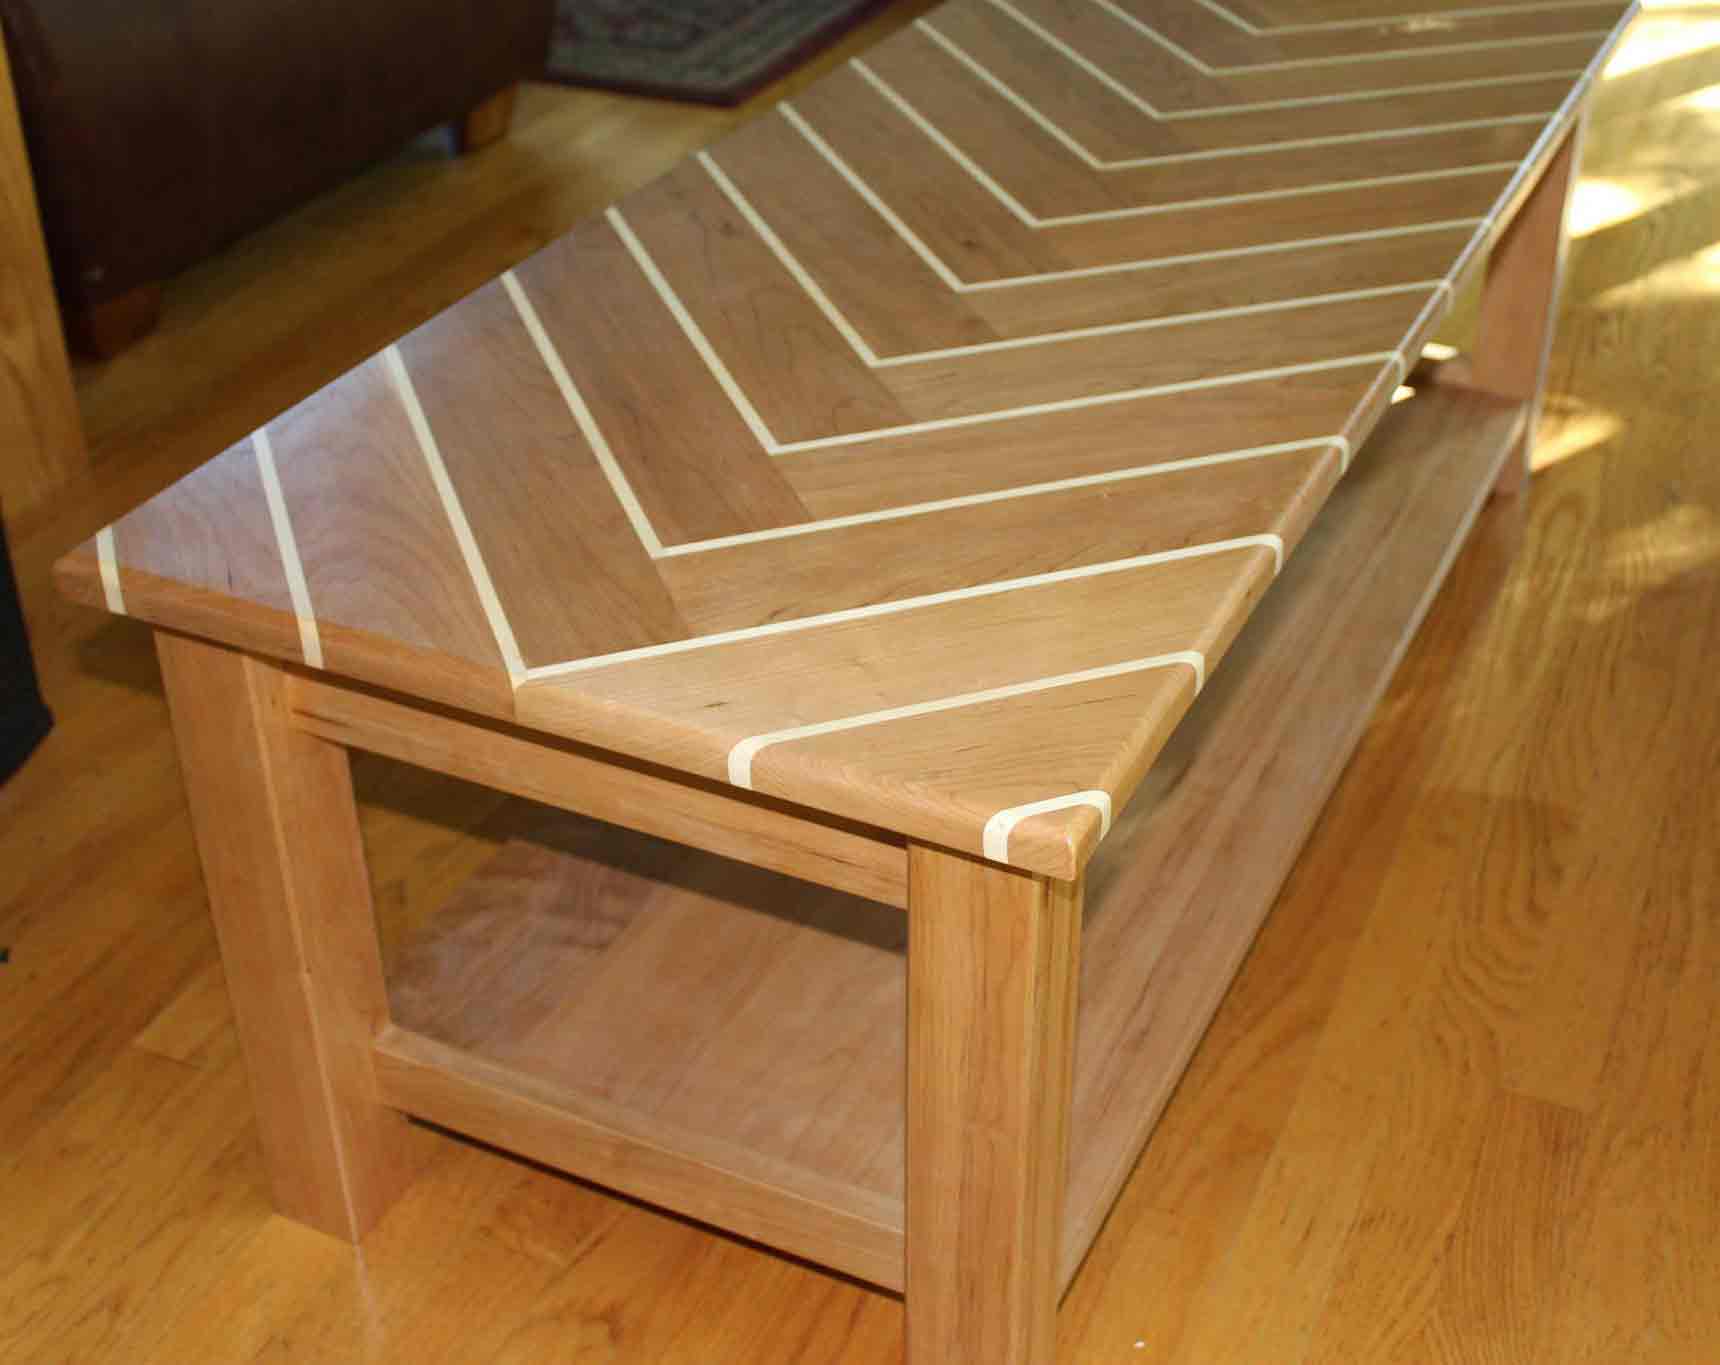 completed deisgn of the coffee table